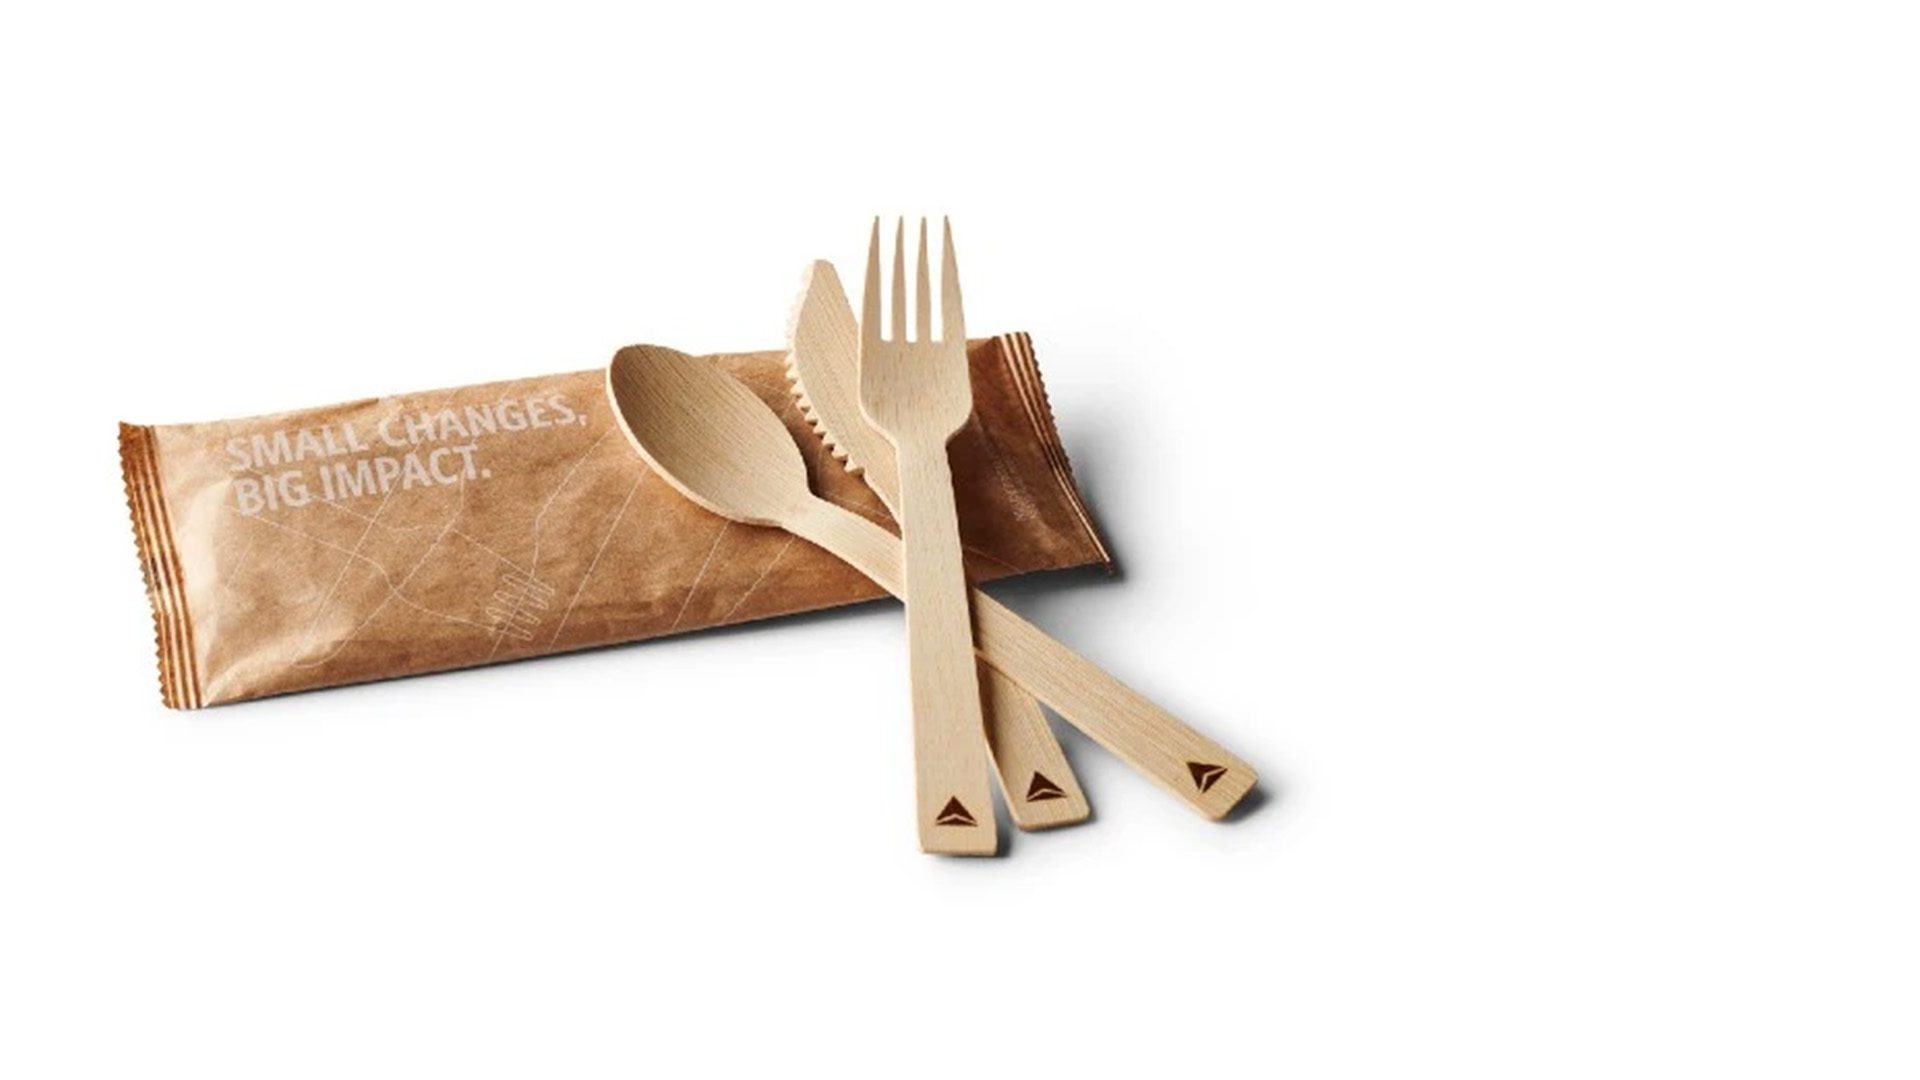 Delta reusable silverware for sustainable airlines